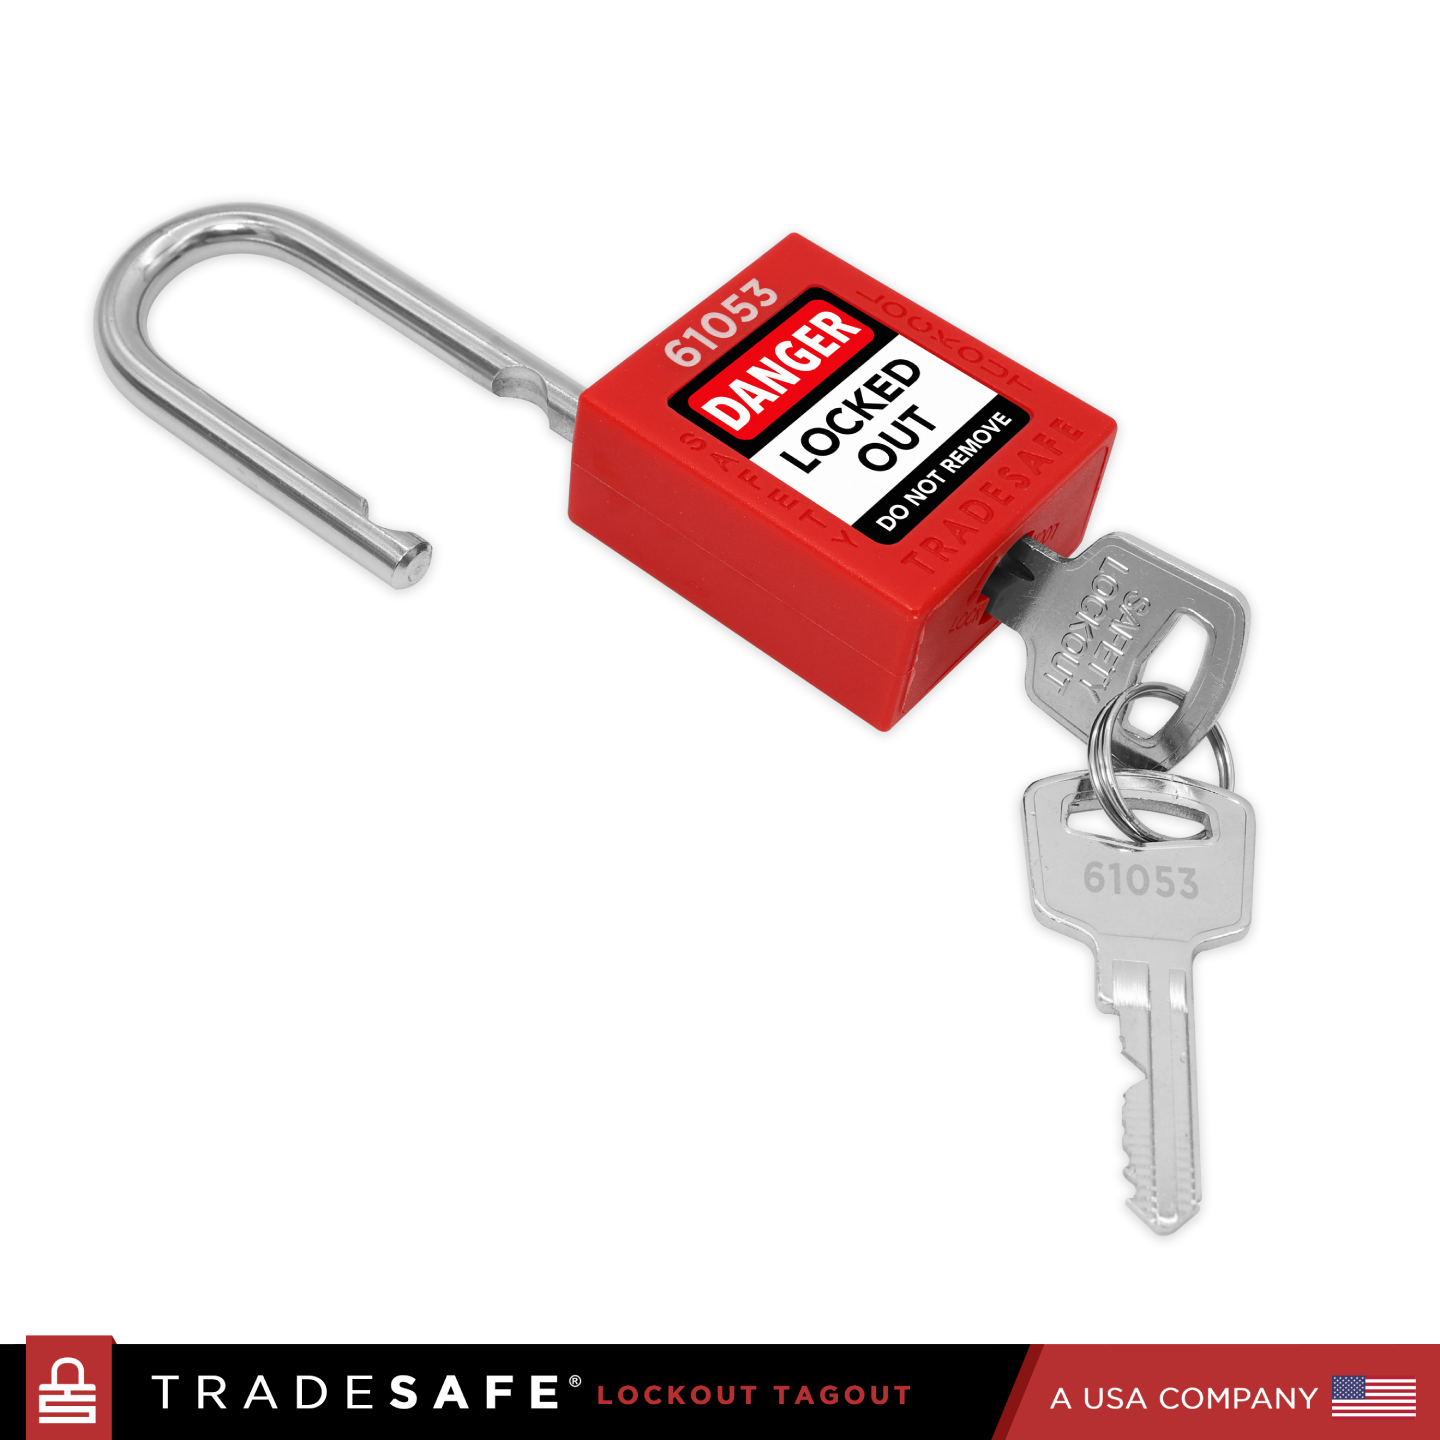 a red loto padlock with 2 keys, 1 key inserted